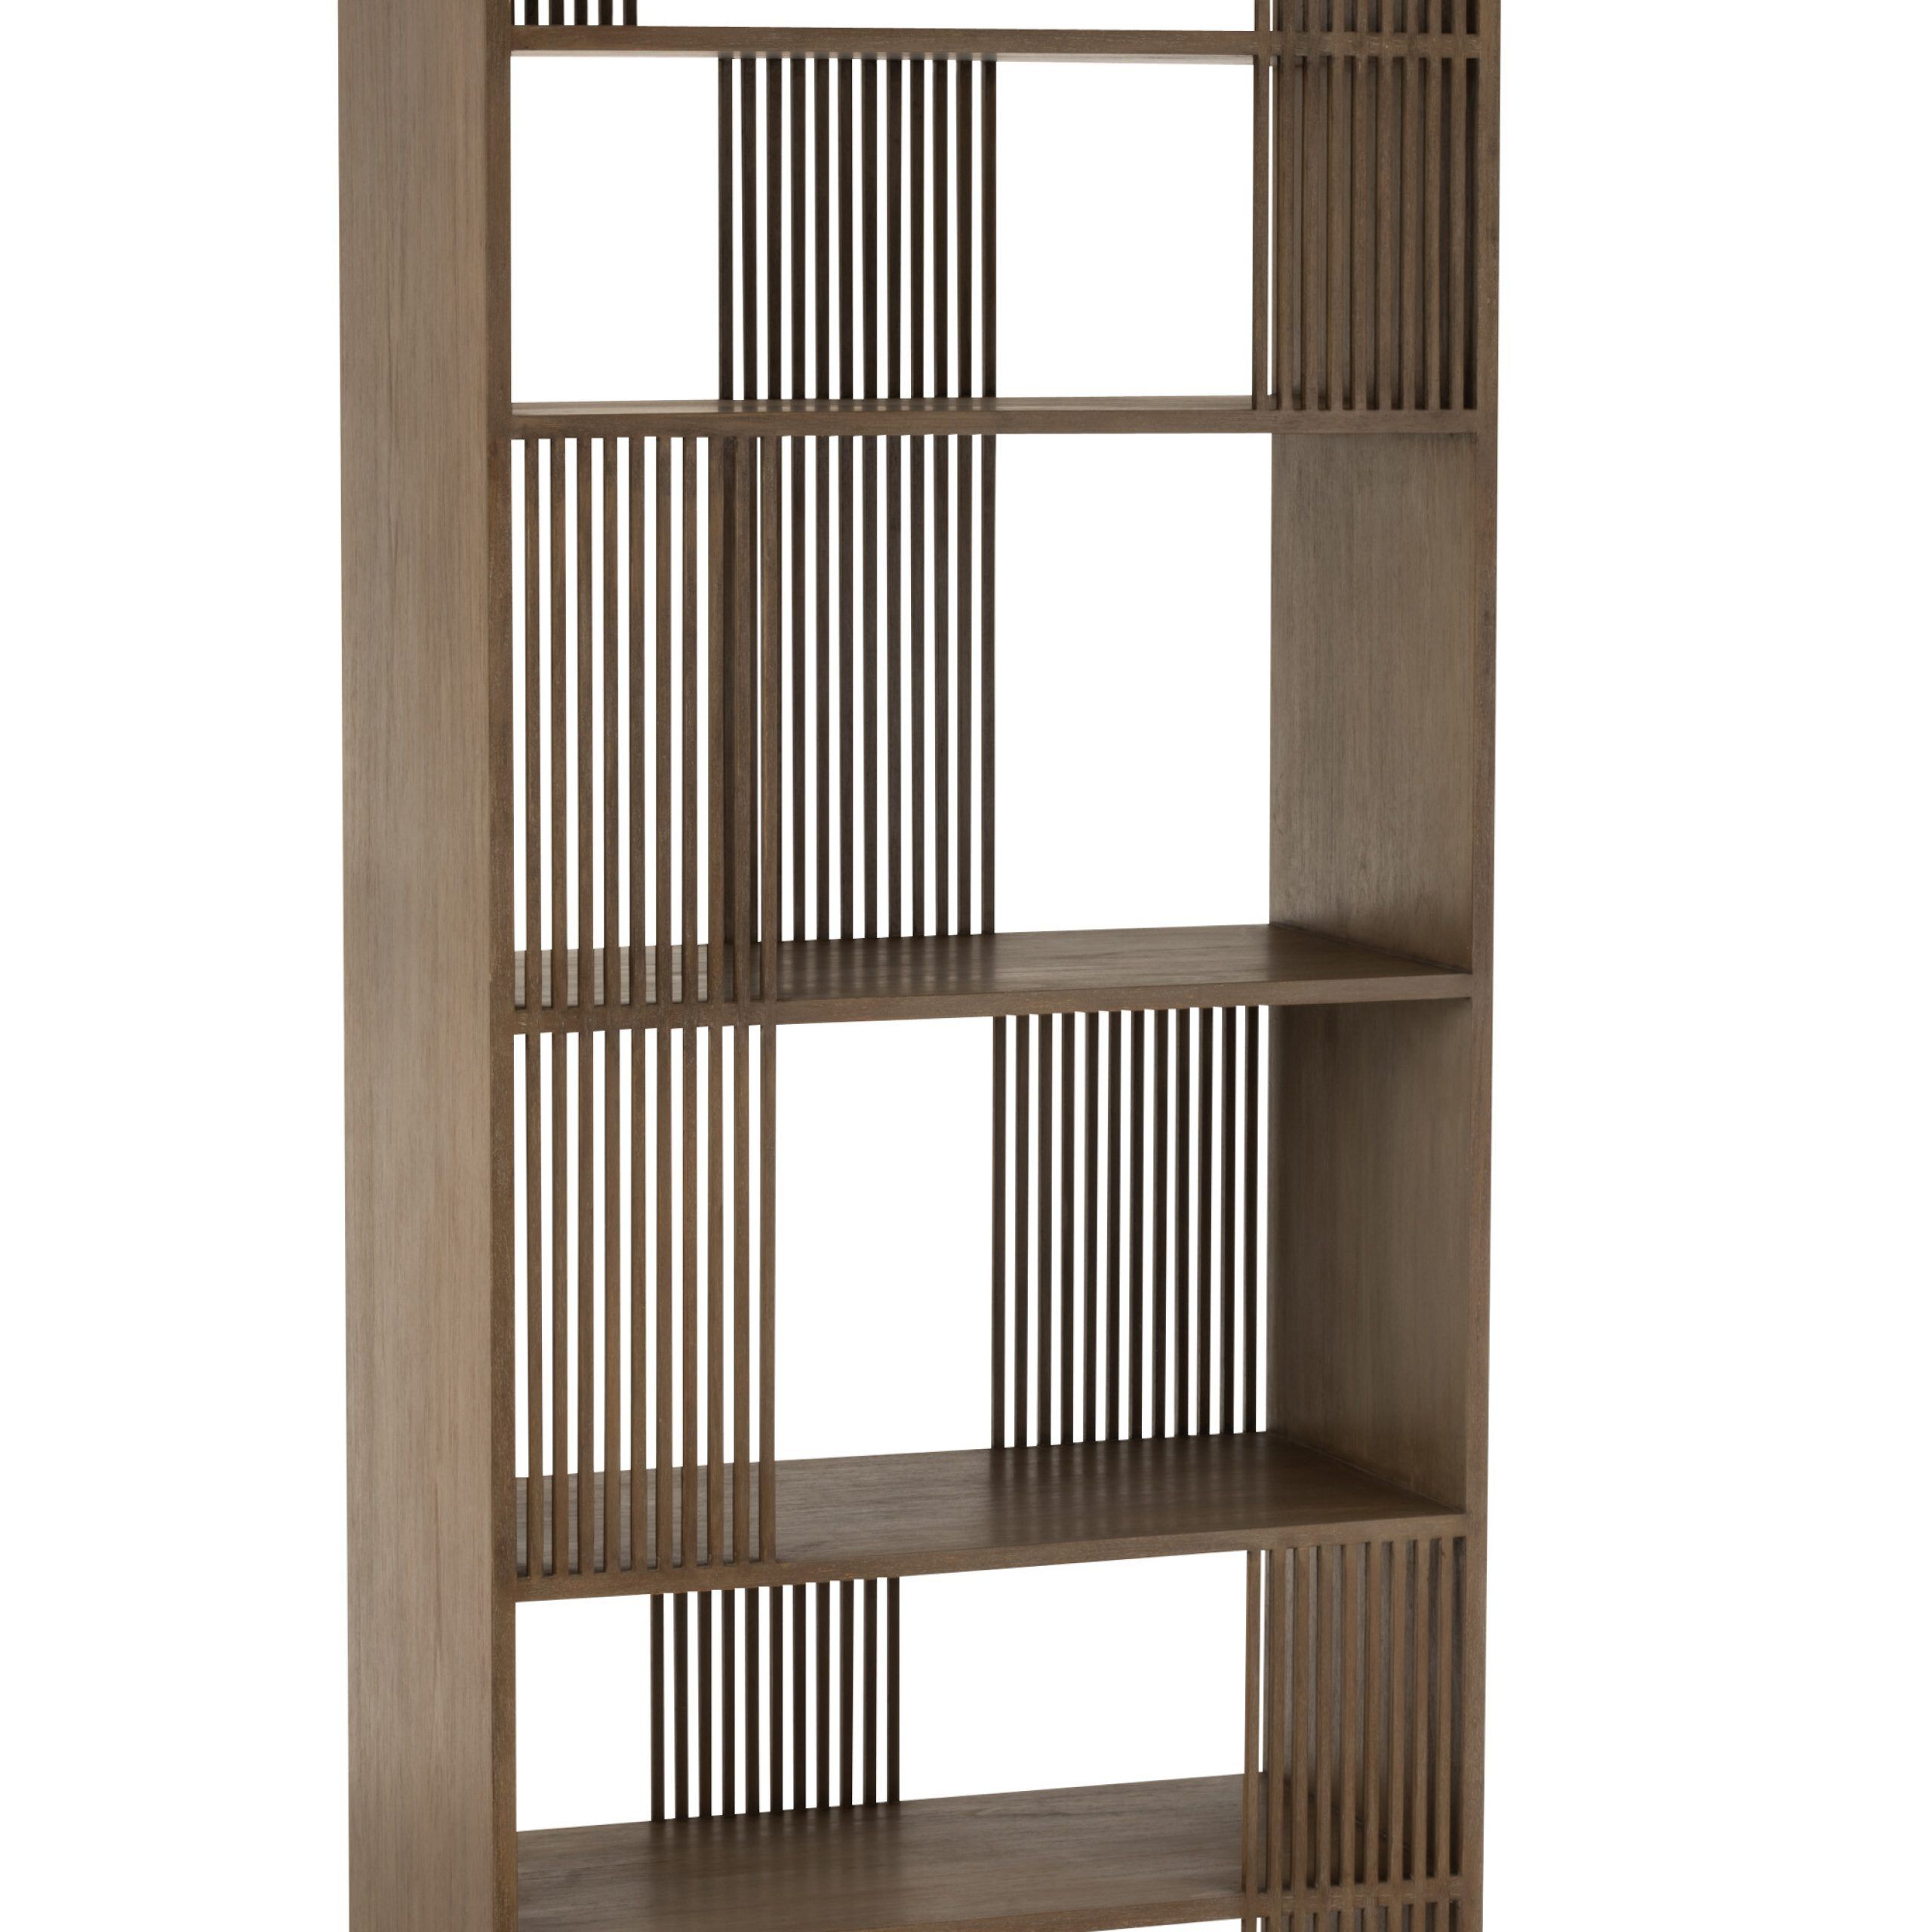 Bookcase Vertical Slats Wd Br | J Linejolipa Throughout Bookcases With Slats (View 14 of 15)